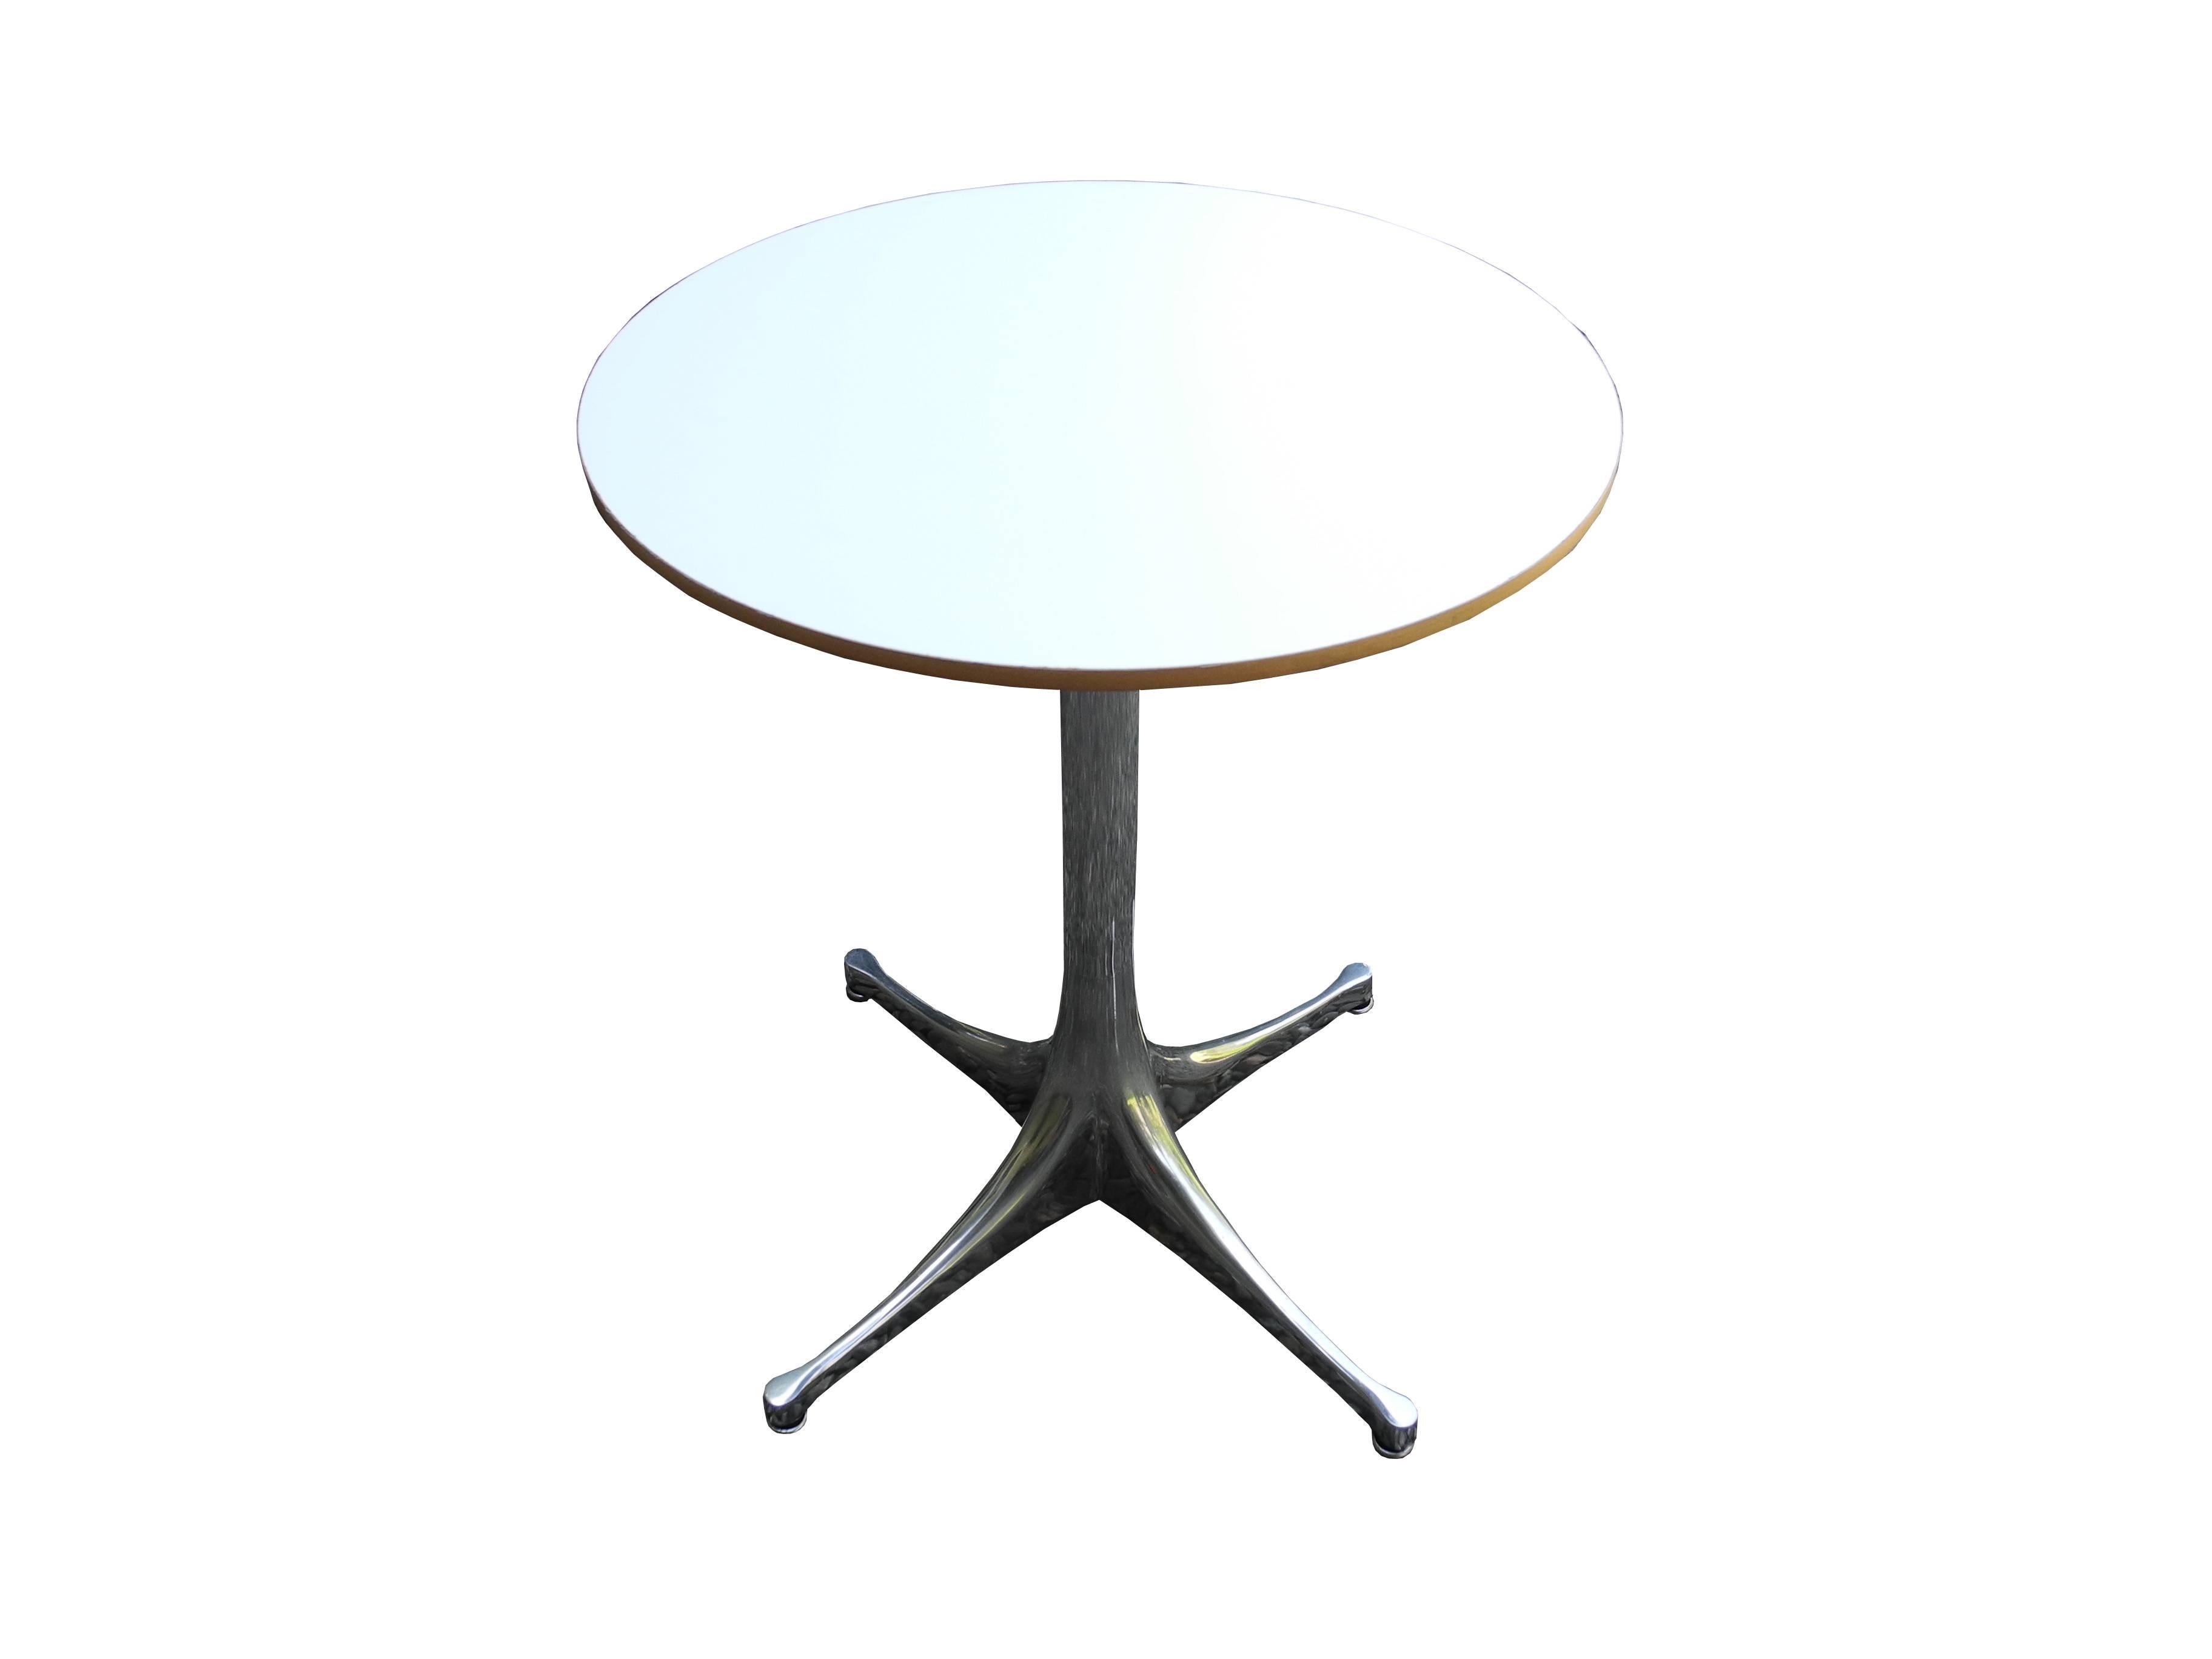 This 17" diameter, 21.5" tall, modern design polished aluminum base with white laminate top and wood trim is a George Nelson Classic. Designed in the 1950s and manufactured by Herman Miller this particular table was made in the 1980s.